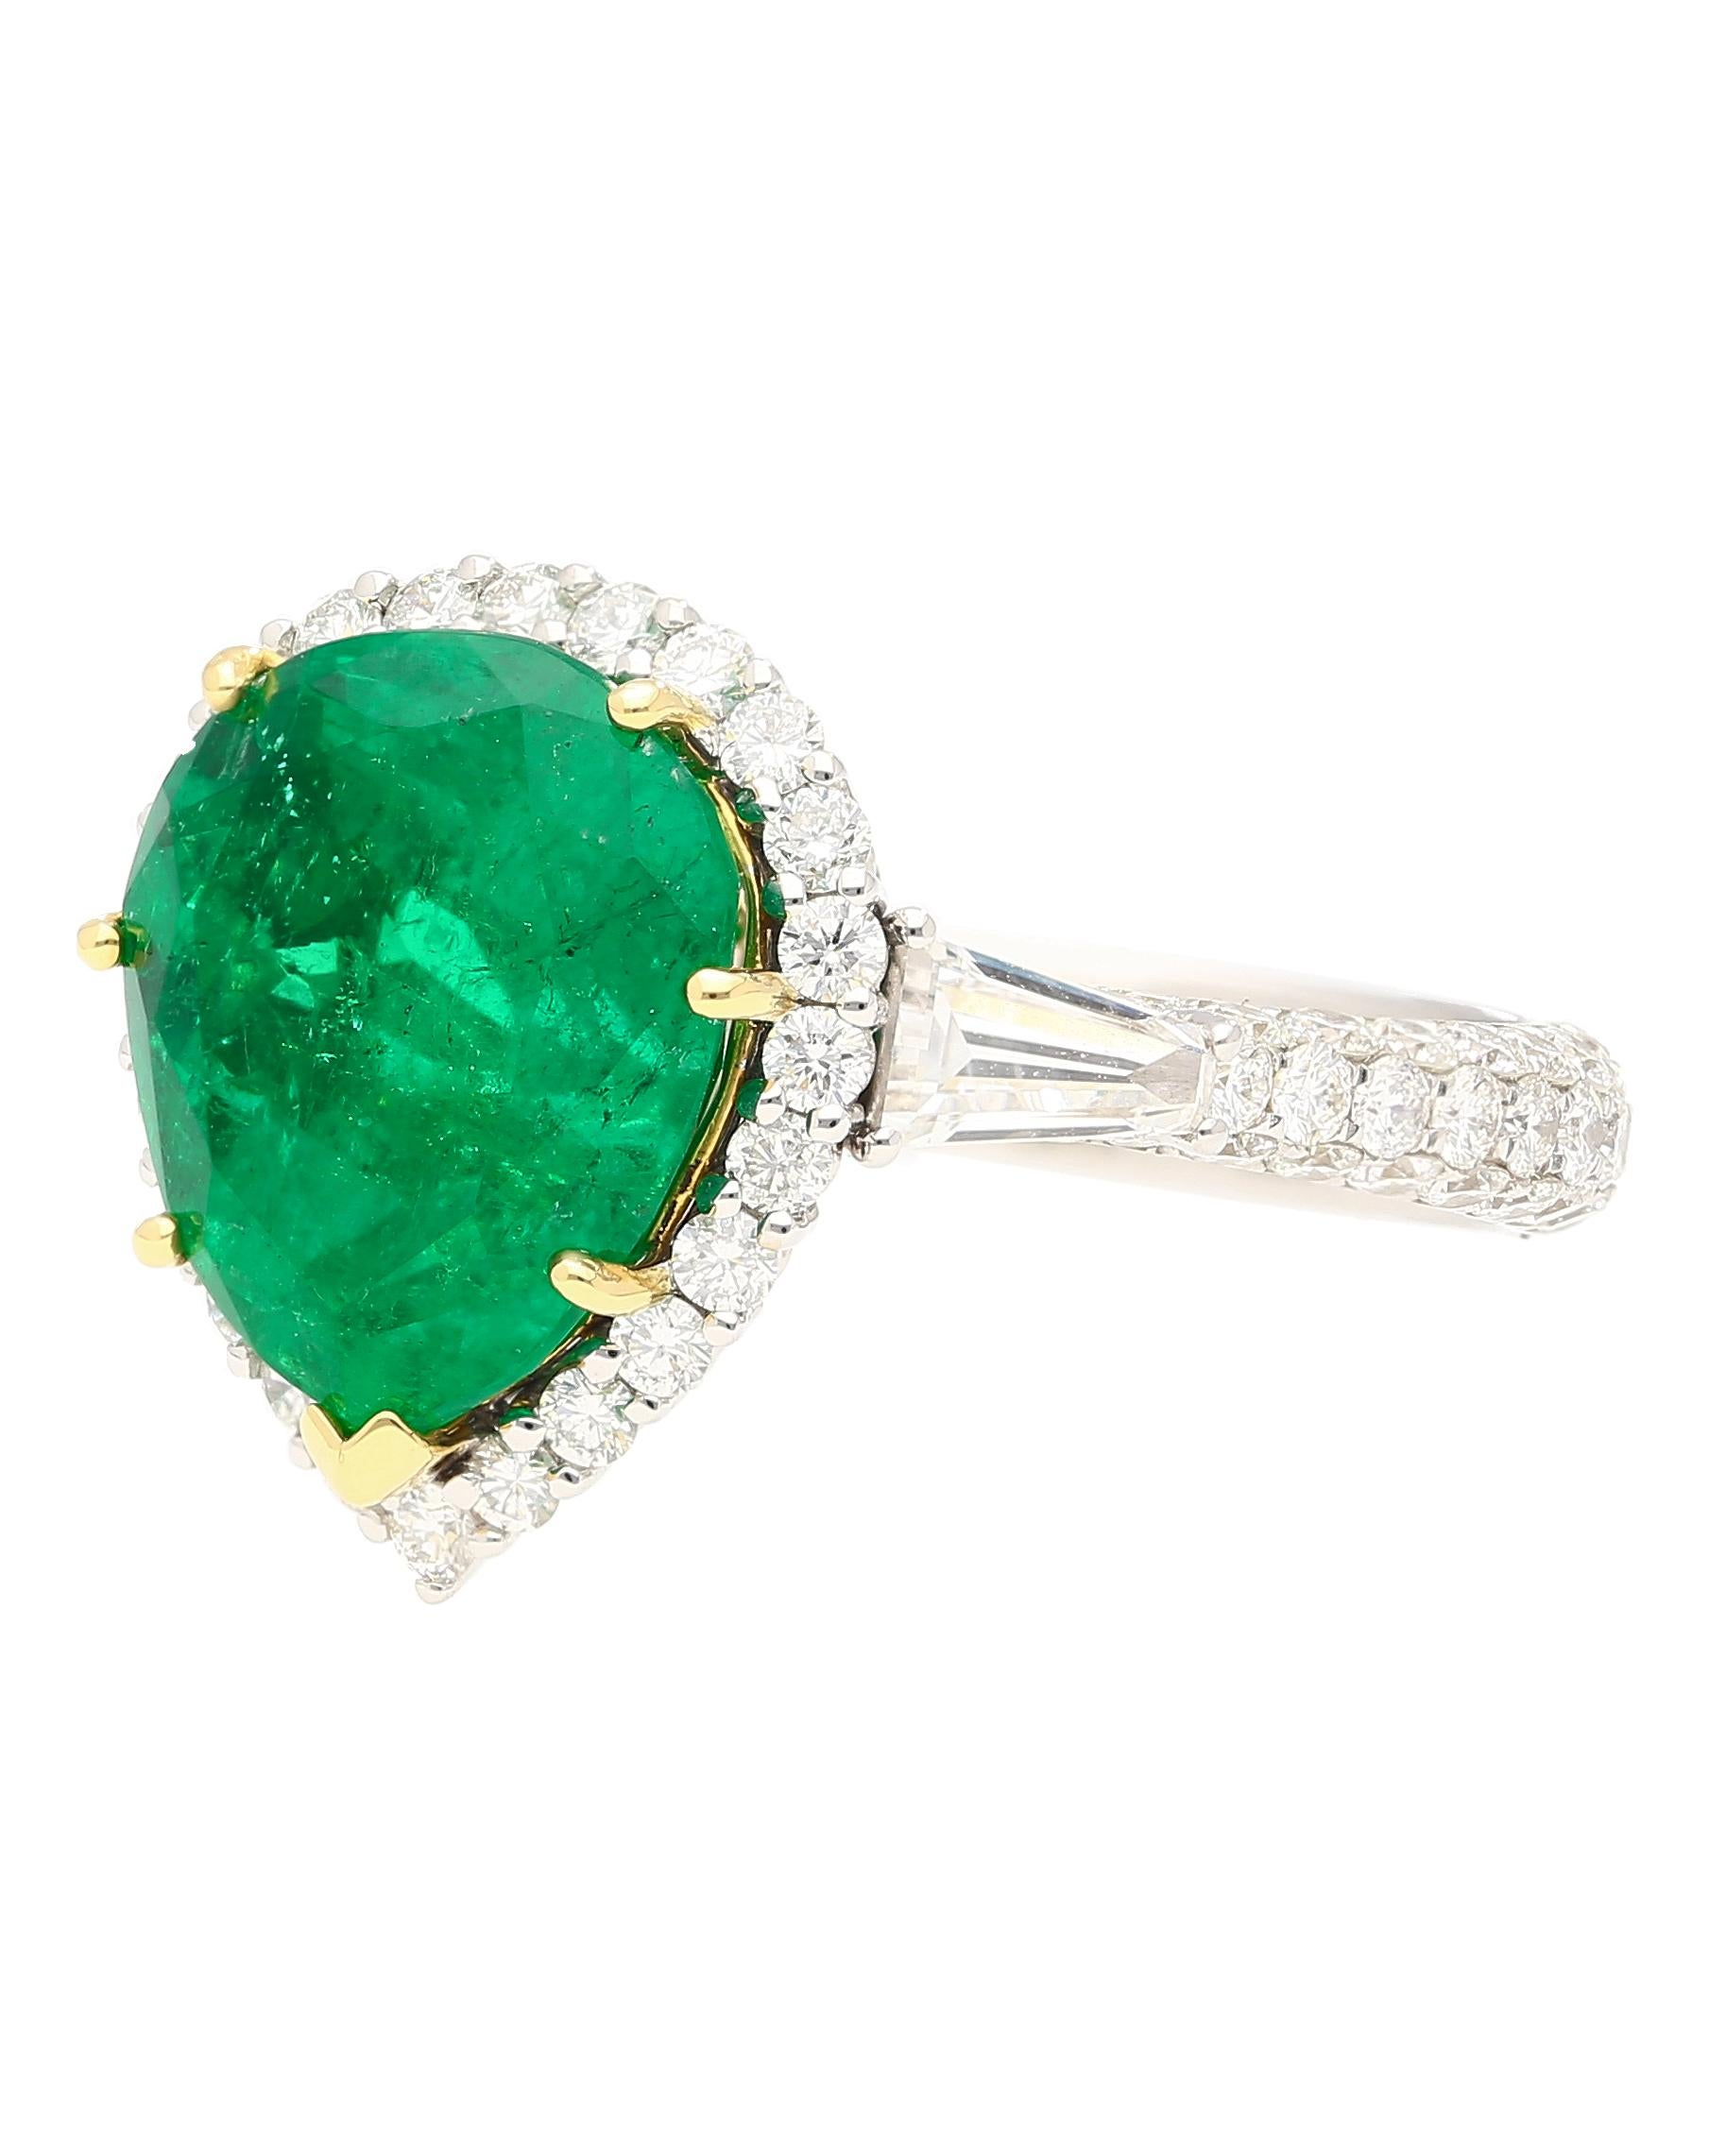 18k white and yellow gold two-tone emerald and diamond ring. Centering a 5.12 carat pear cut Colombian emerald of vivid green color. GRS certified. Flanked by two baguette cut diamond side stones and 181 round cut diamonds mounted on the shank.

The